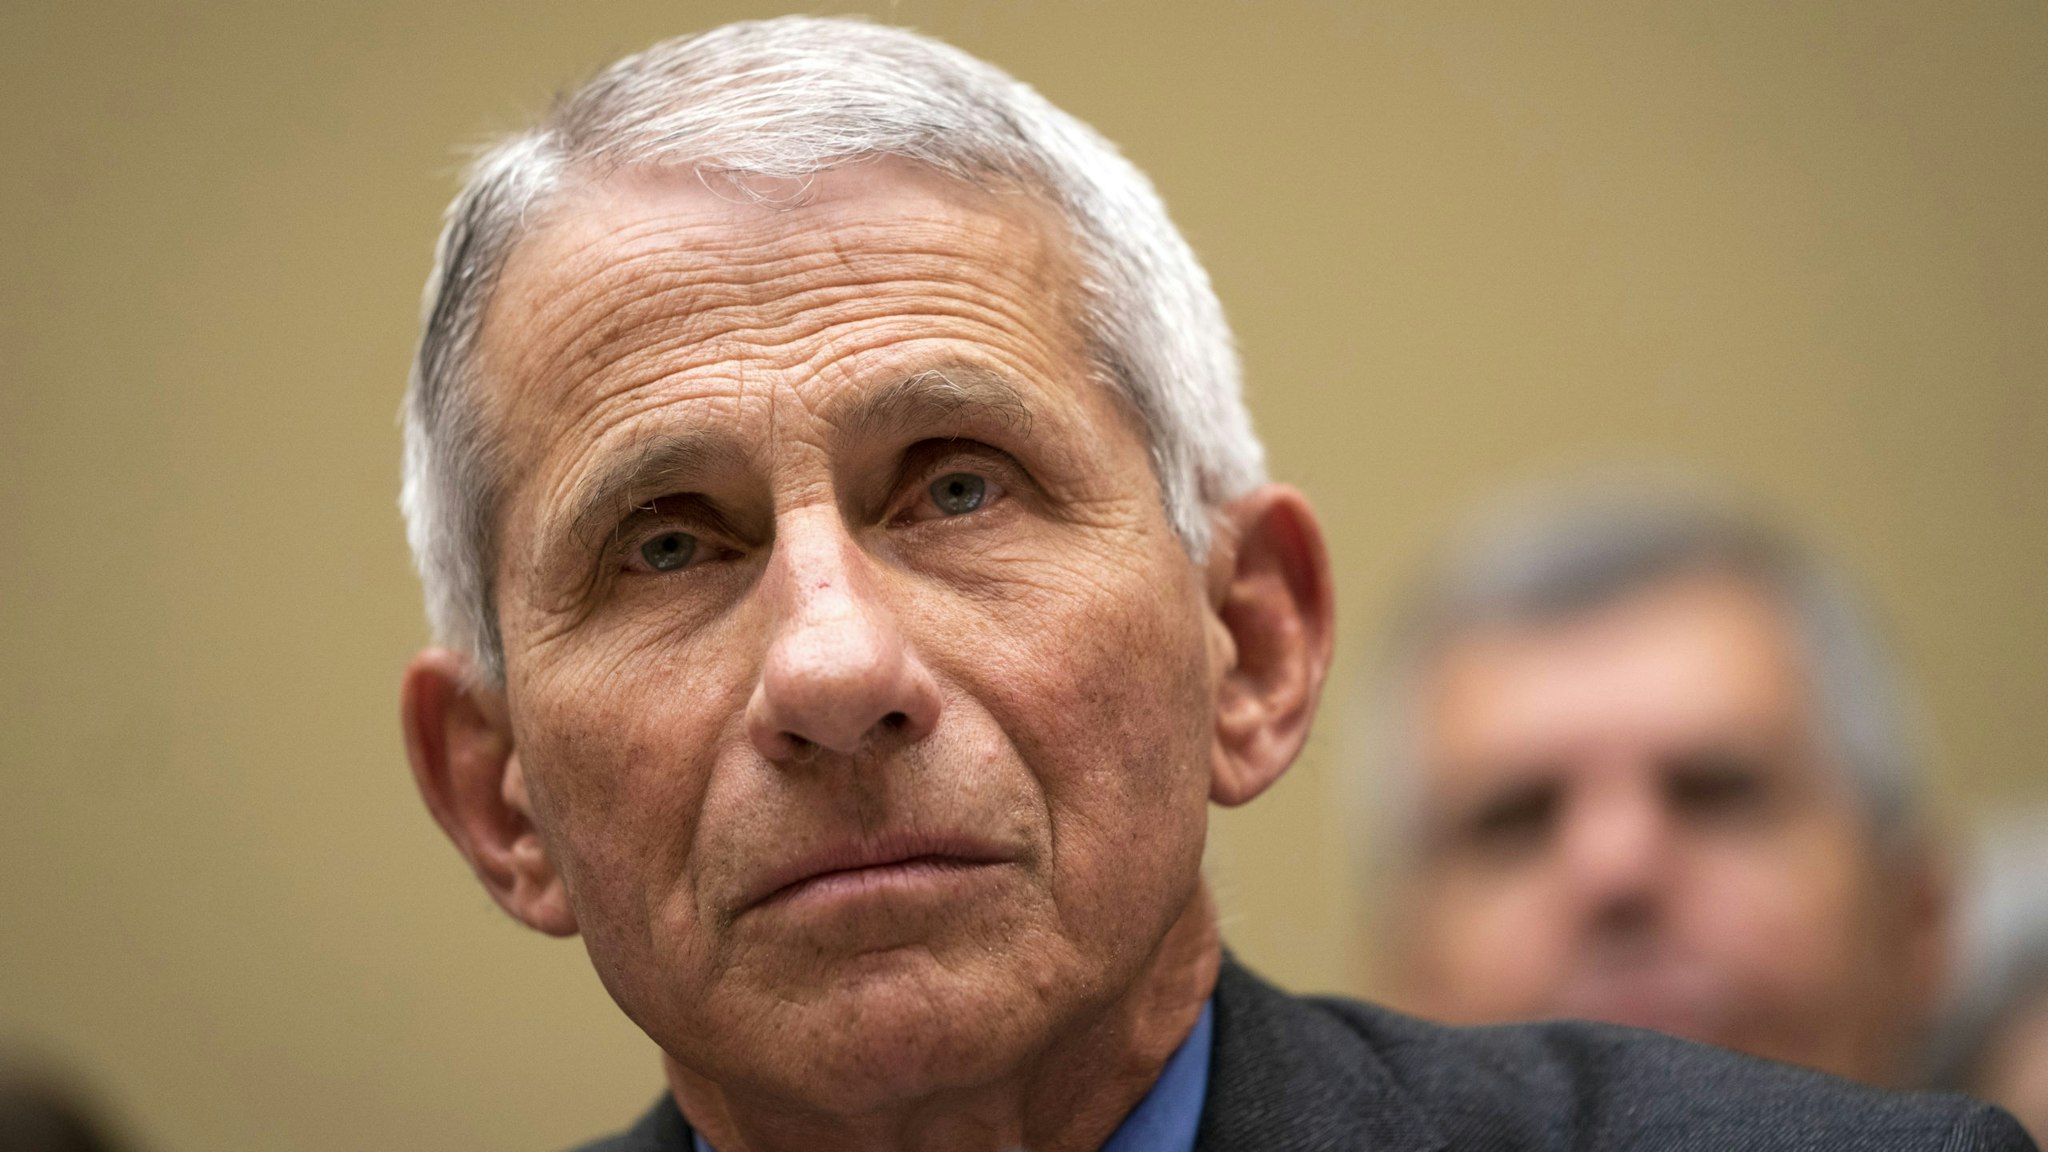 WASHINGTON, DC - MARCH 11: Dr. Anthony Fauci, director of the National Institute of Allergy and Infectious Diseases at the National Institutes of Health, testifies during a House Oversight And Reform Committee hearing concerning government preparedness and response to the coronavirus, in the Rayburn House Office Building on Capitol Hill March 11, 2020 in Washington, DC. Since December 2019, coronavirus (COVID-19) has infected more than 109,000 people and killed more than 3,800 people in 105 countries.